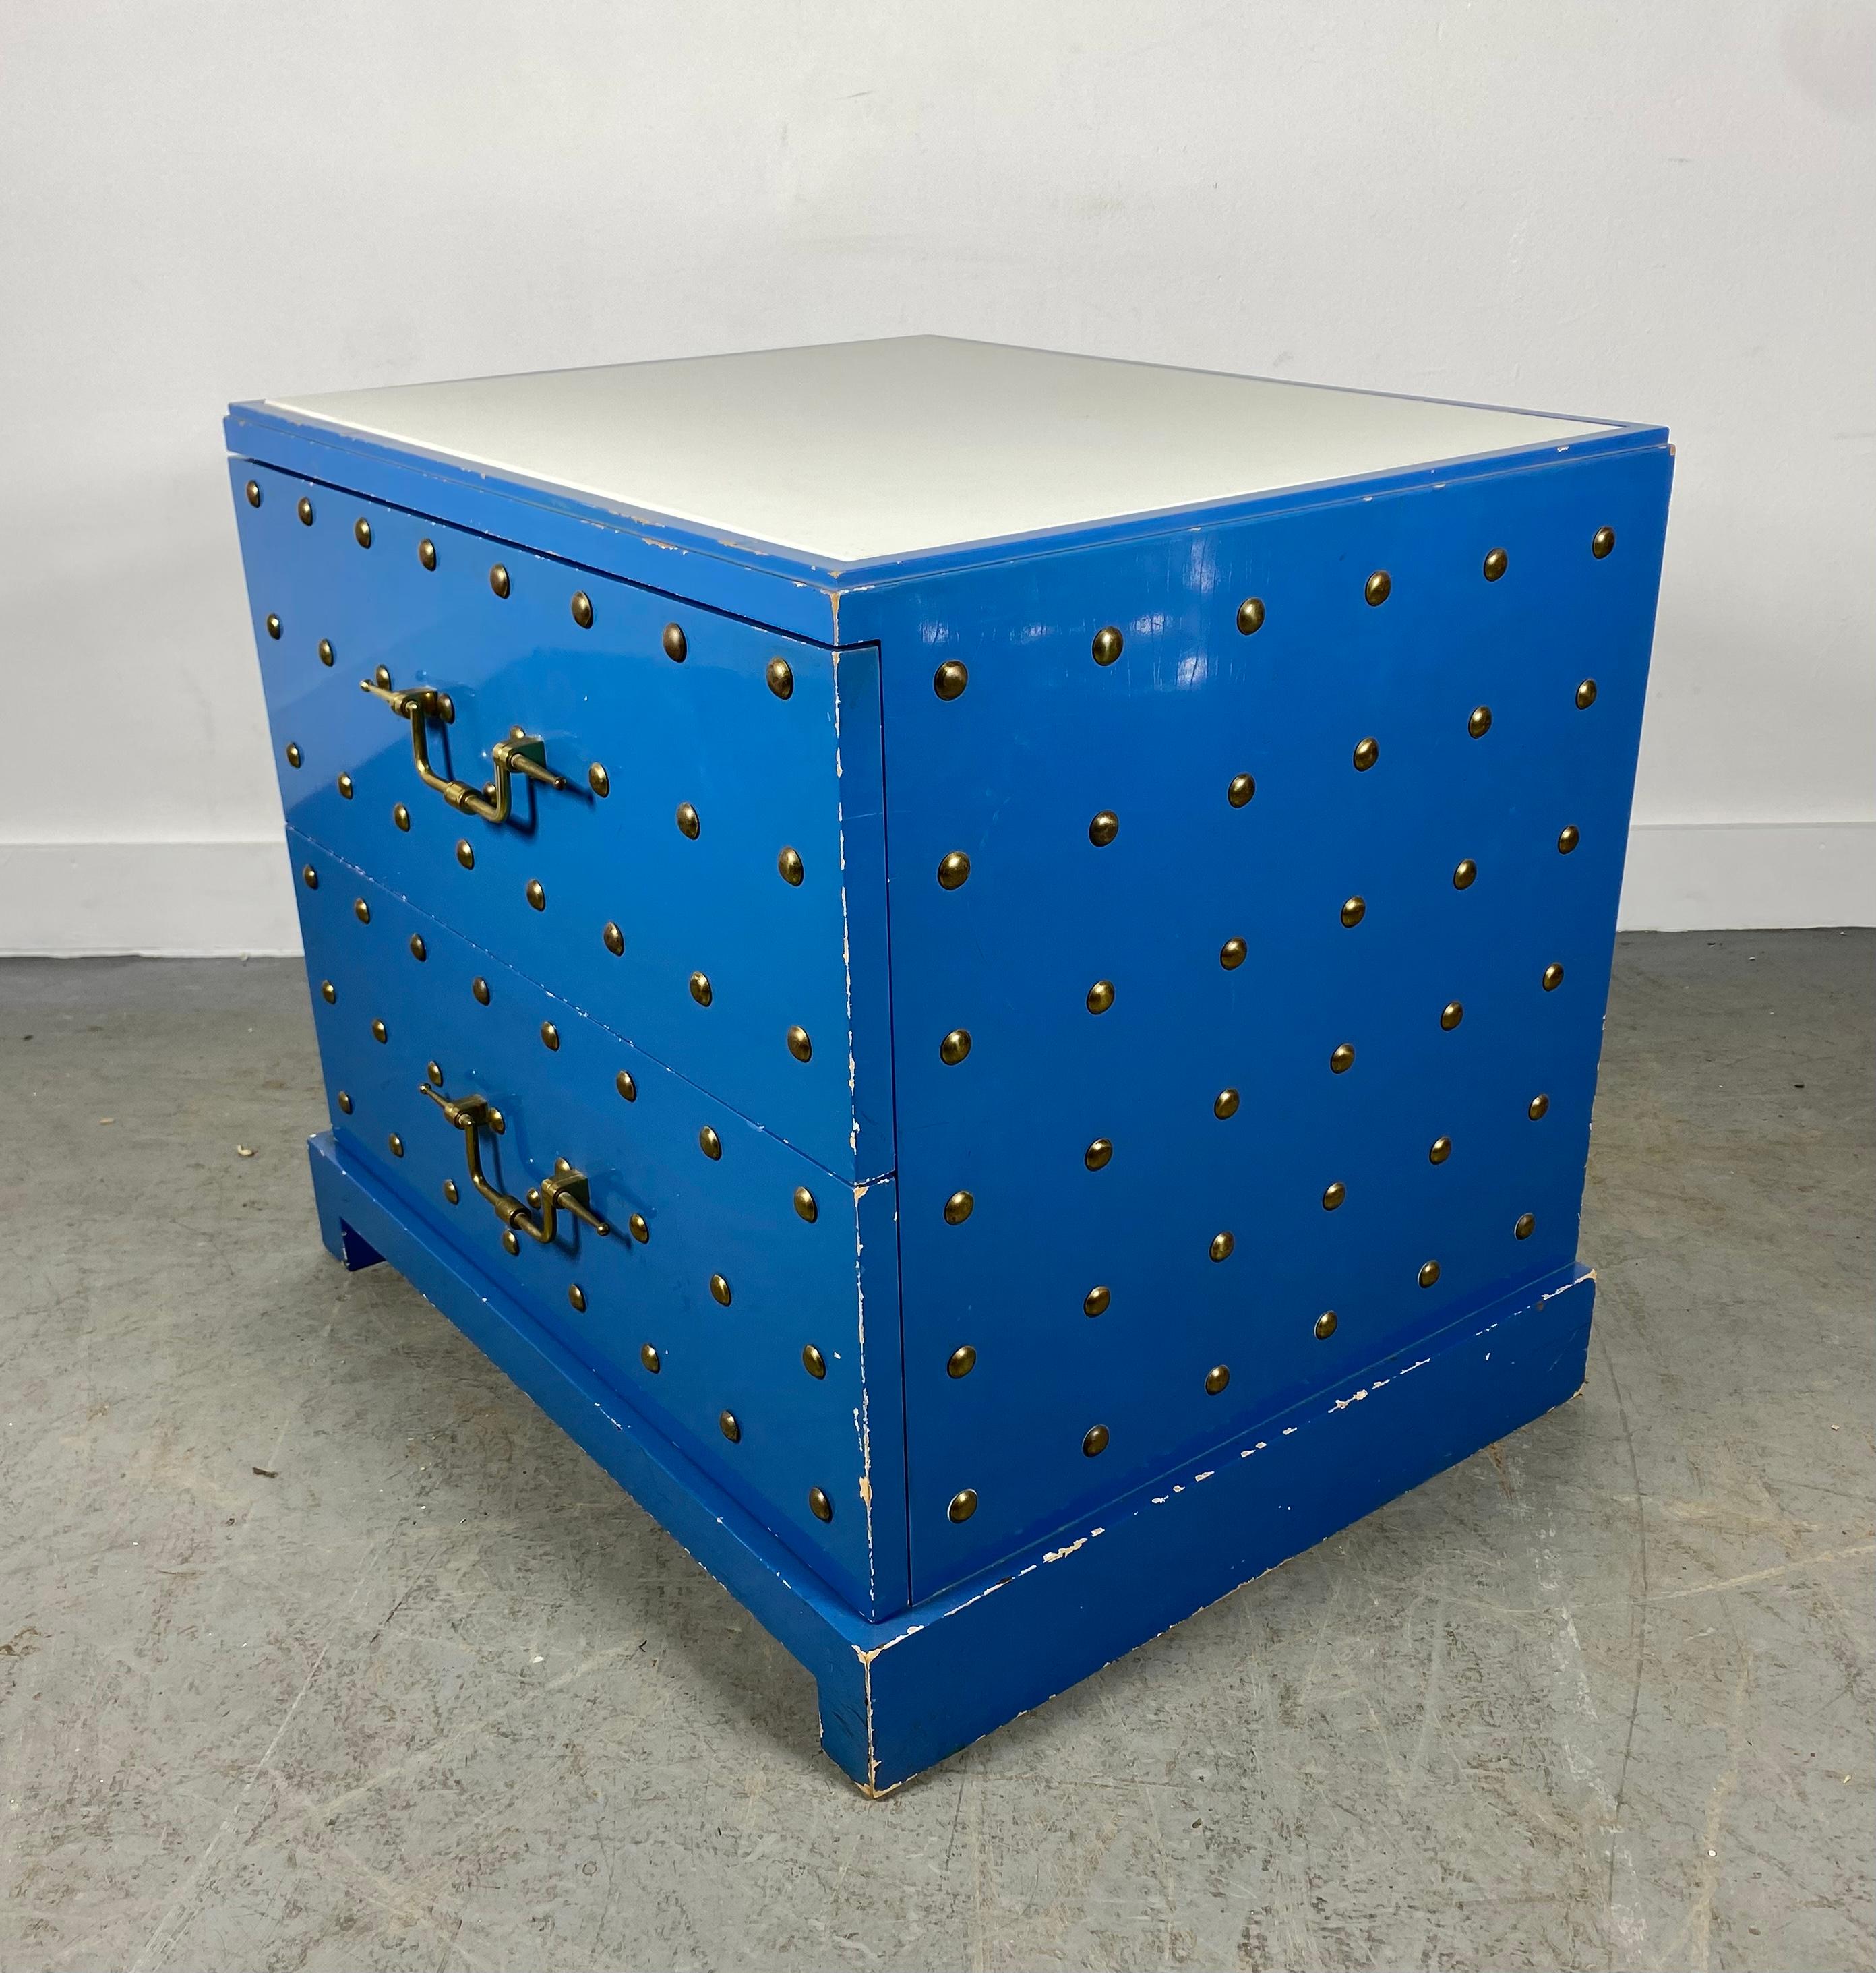 Tommy Parzinger for Parzinger Originals blue lacquered two drawer cabinet.
Some call this a dresser but scale suggests nightstand or bedside chest.
Solid brass round domed studs evocative of hobnail and quintessentially Parzinger refined drawer